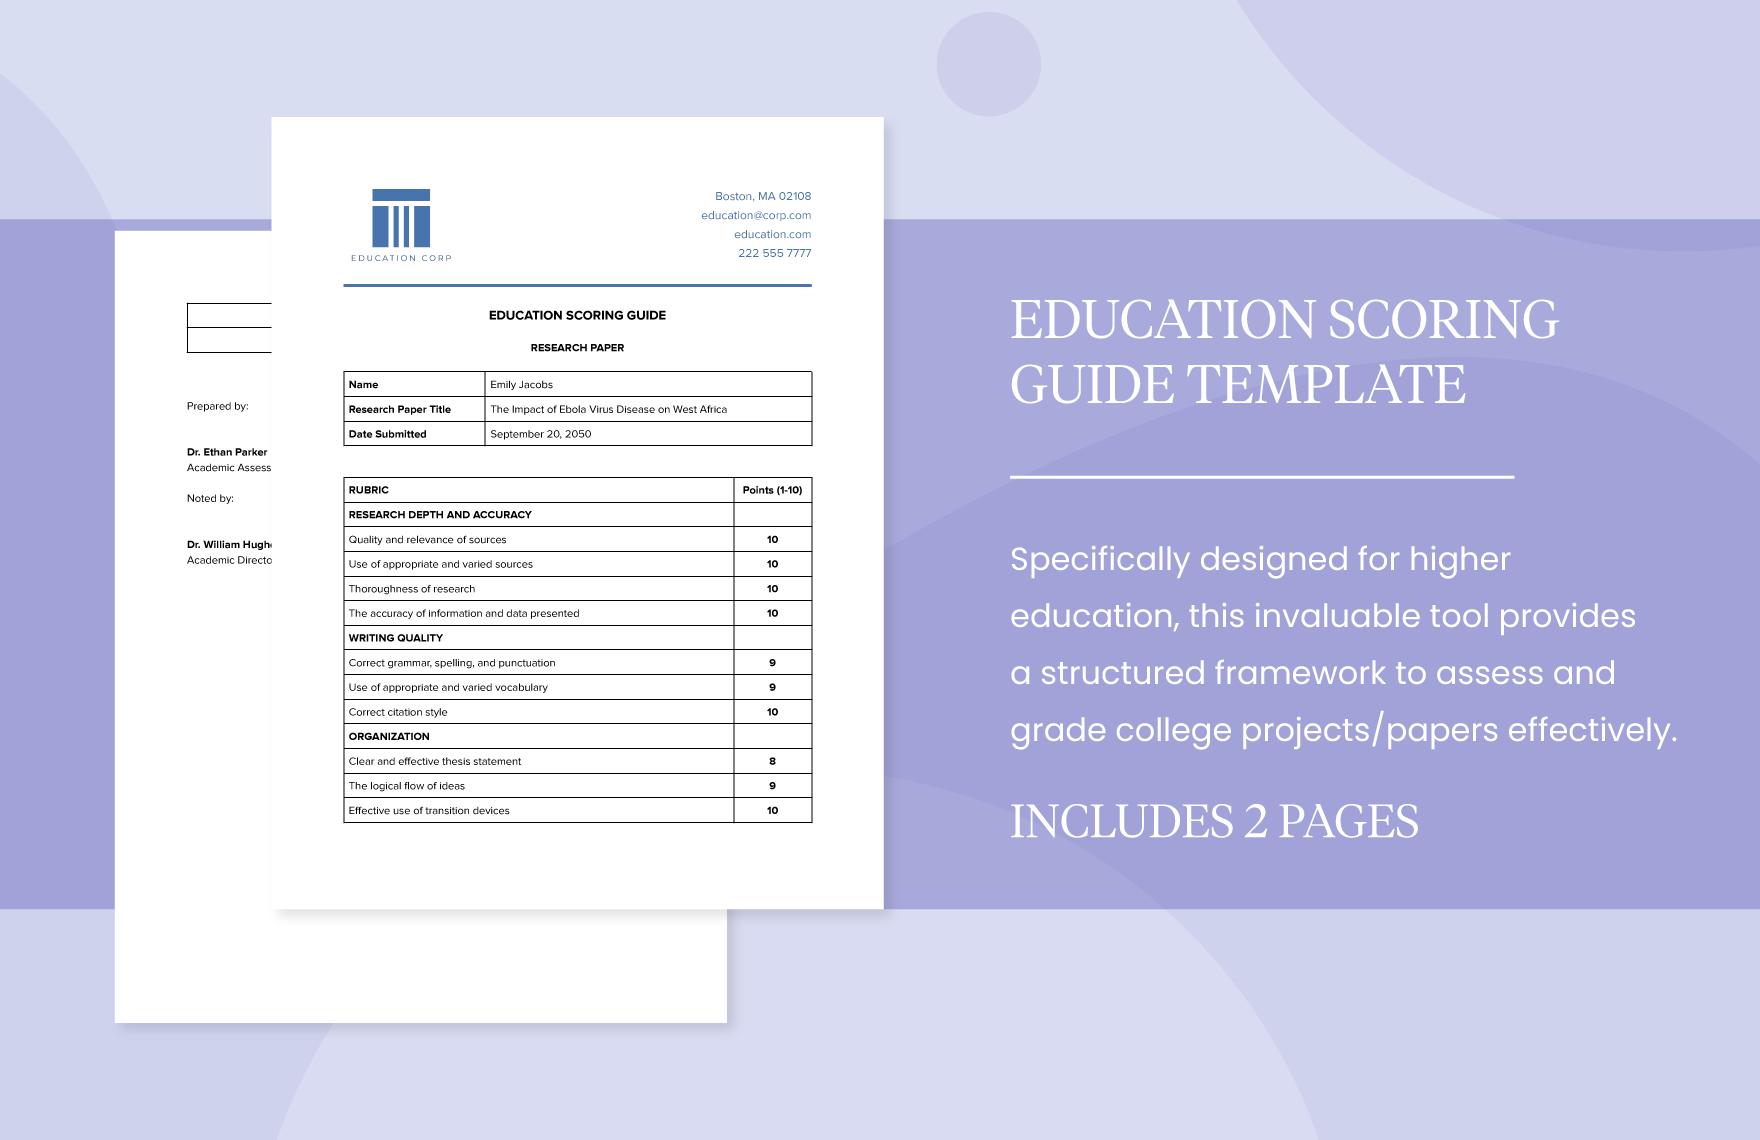 Education Scoring Guide Template in Word, Google Docs, PDF